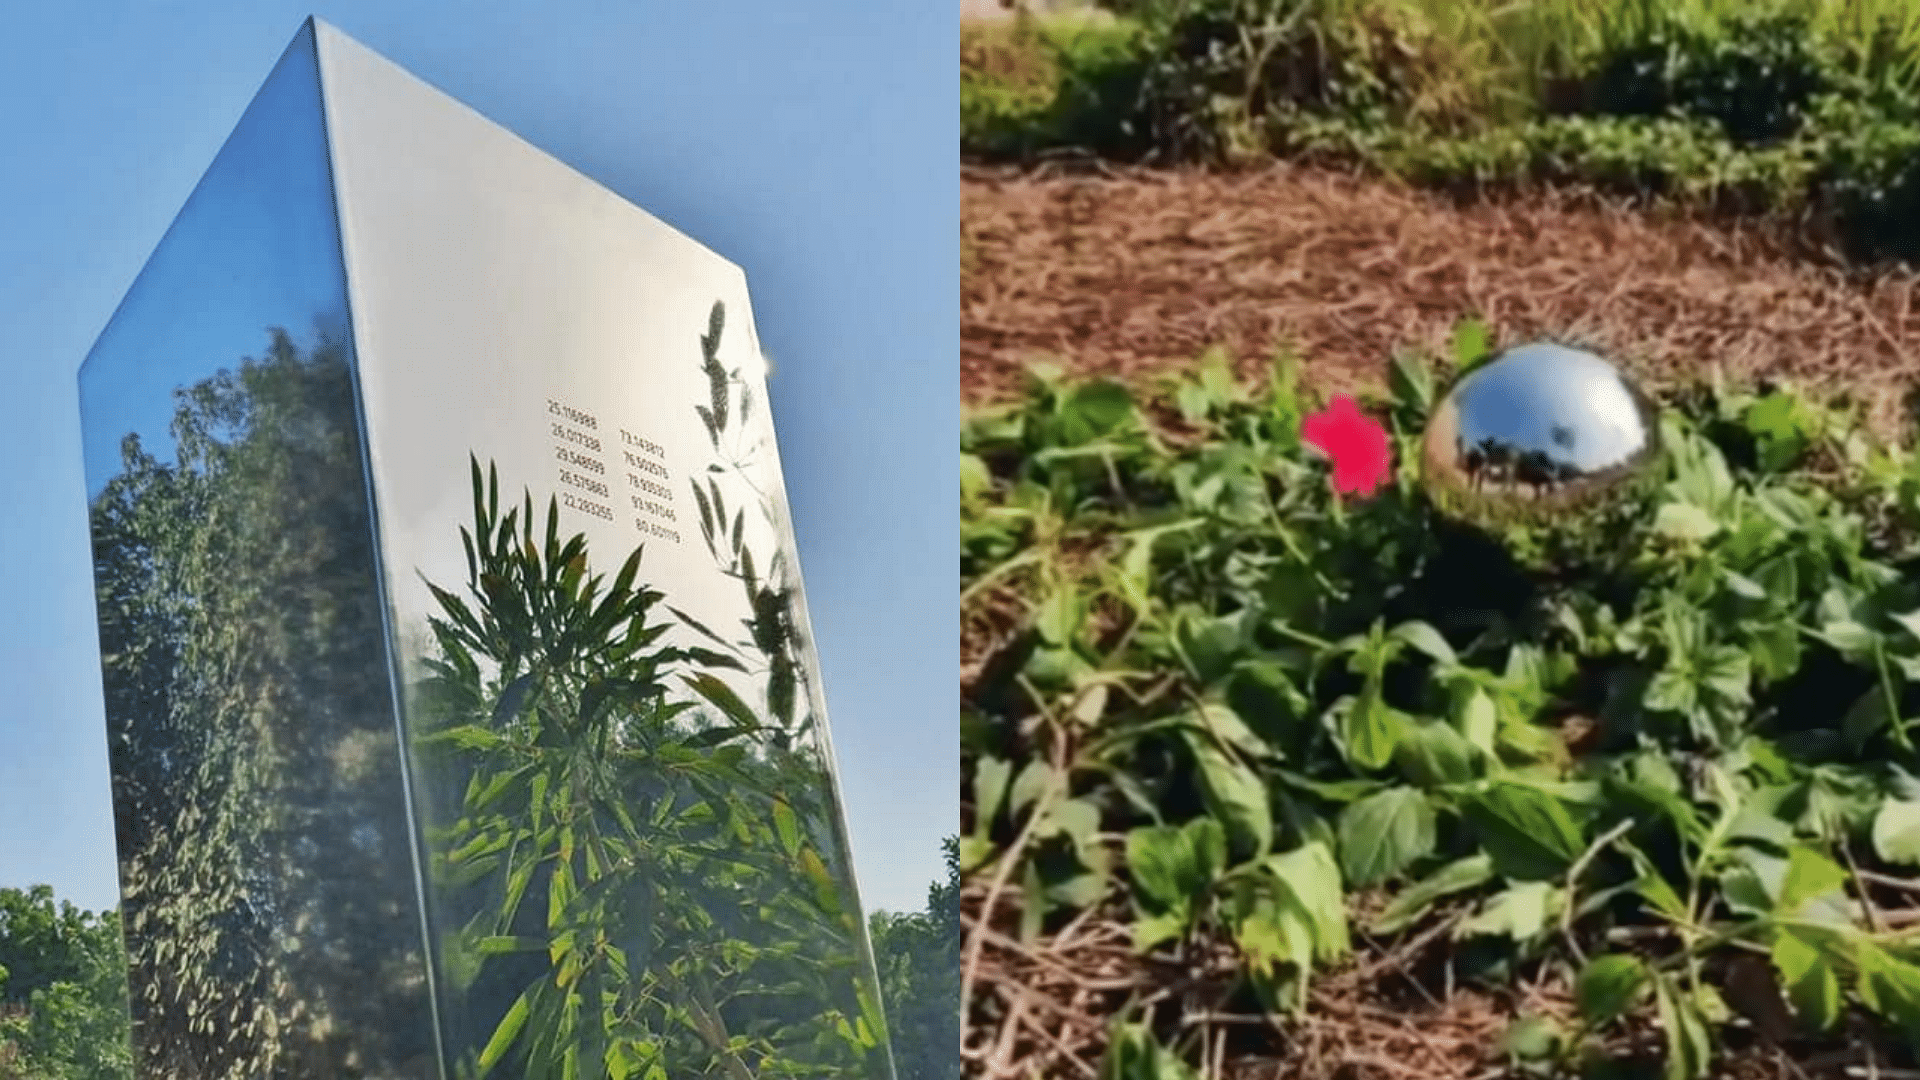 India’s 1st Monolith Disappears, Replaced by Sphere and Note